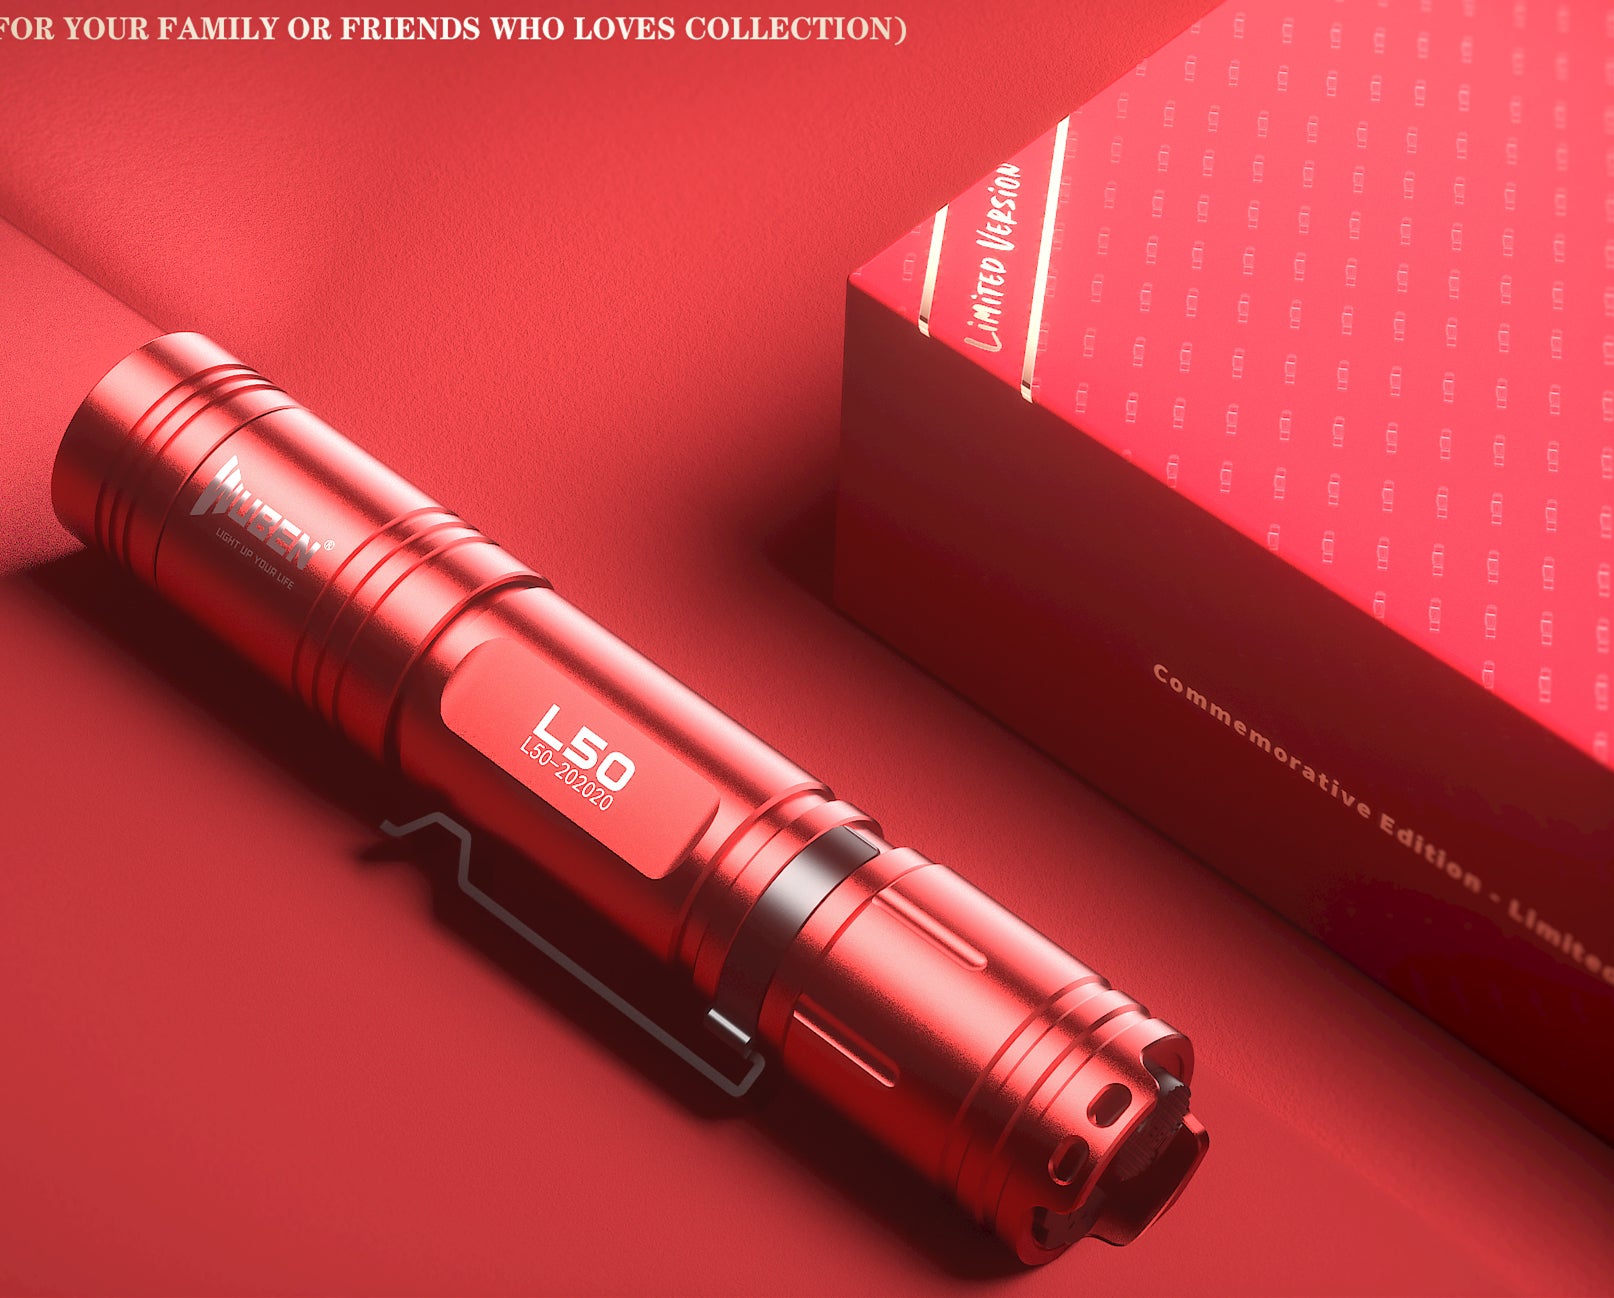 Are Flashlights Available for Gifts? WUBEN L50-Red Commemorative Edition - WUBEN